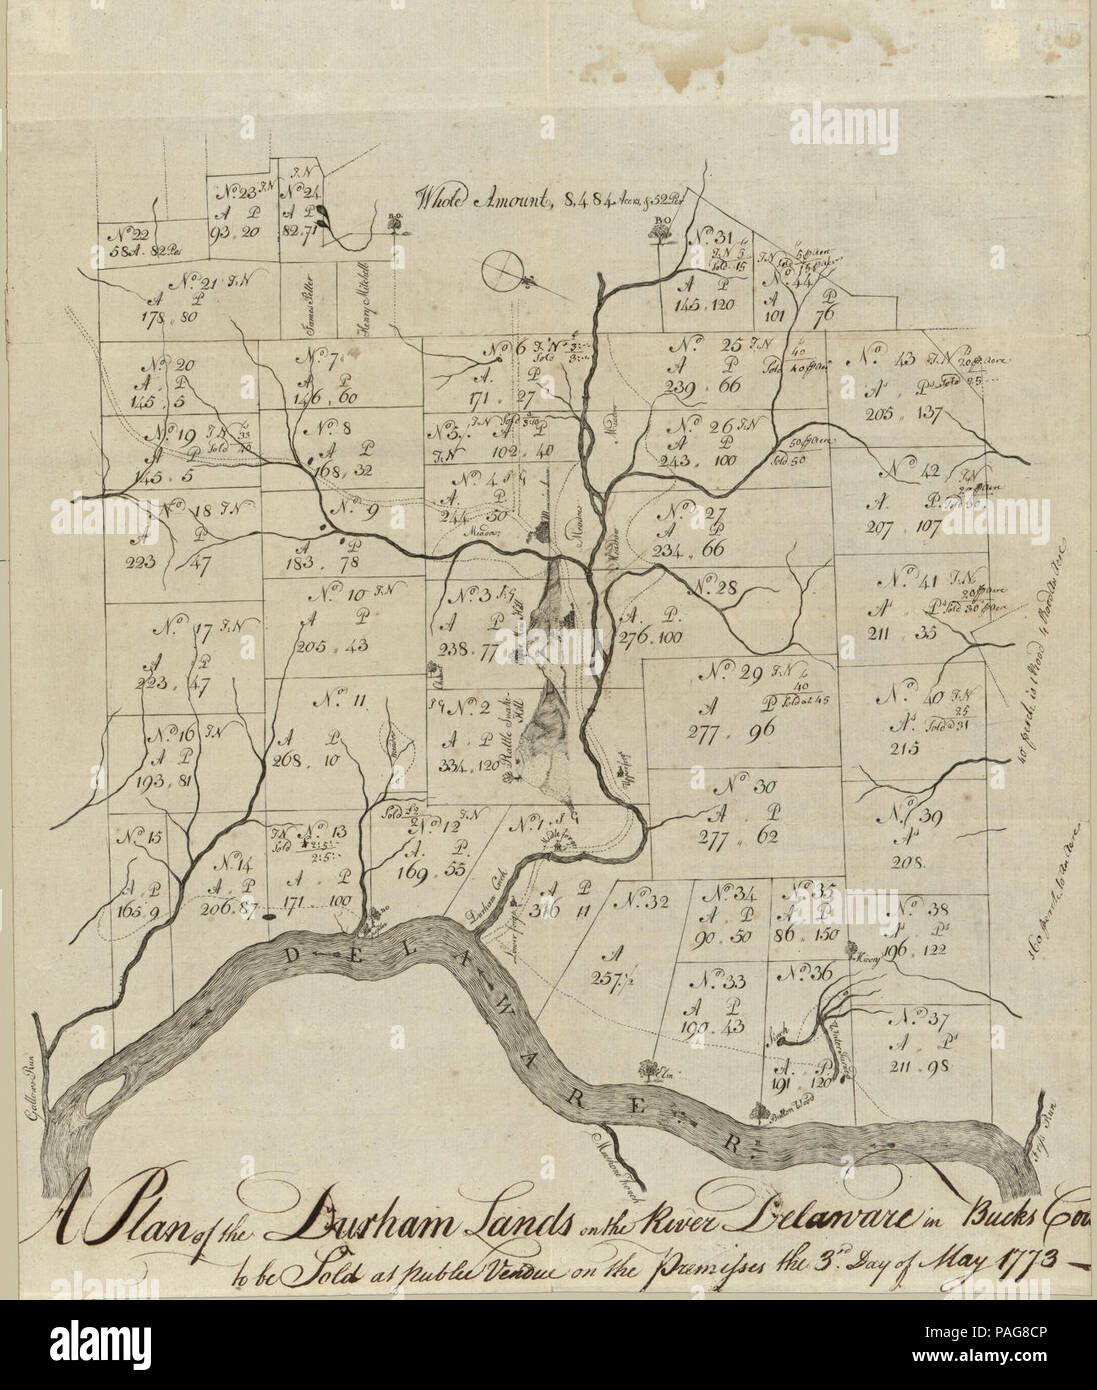 A Plan of the Durham lands on the River Delaware in Bucks Cou(nty) - to be sold at public vendue on the premisses the 3rd day of May 1773. Stock Photo